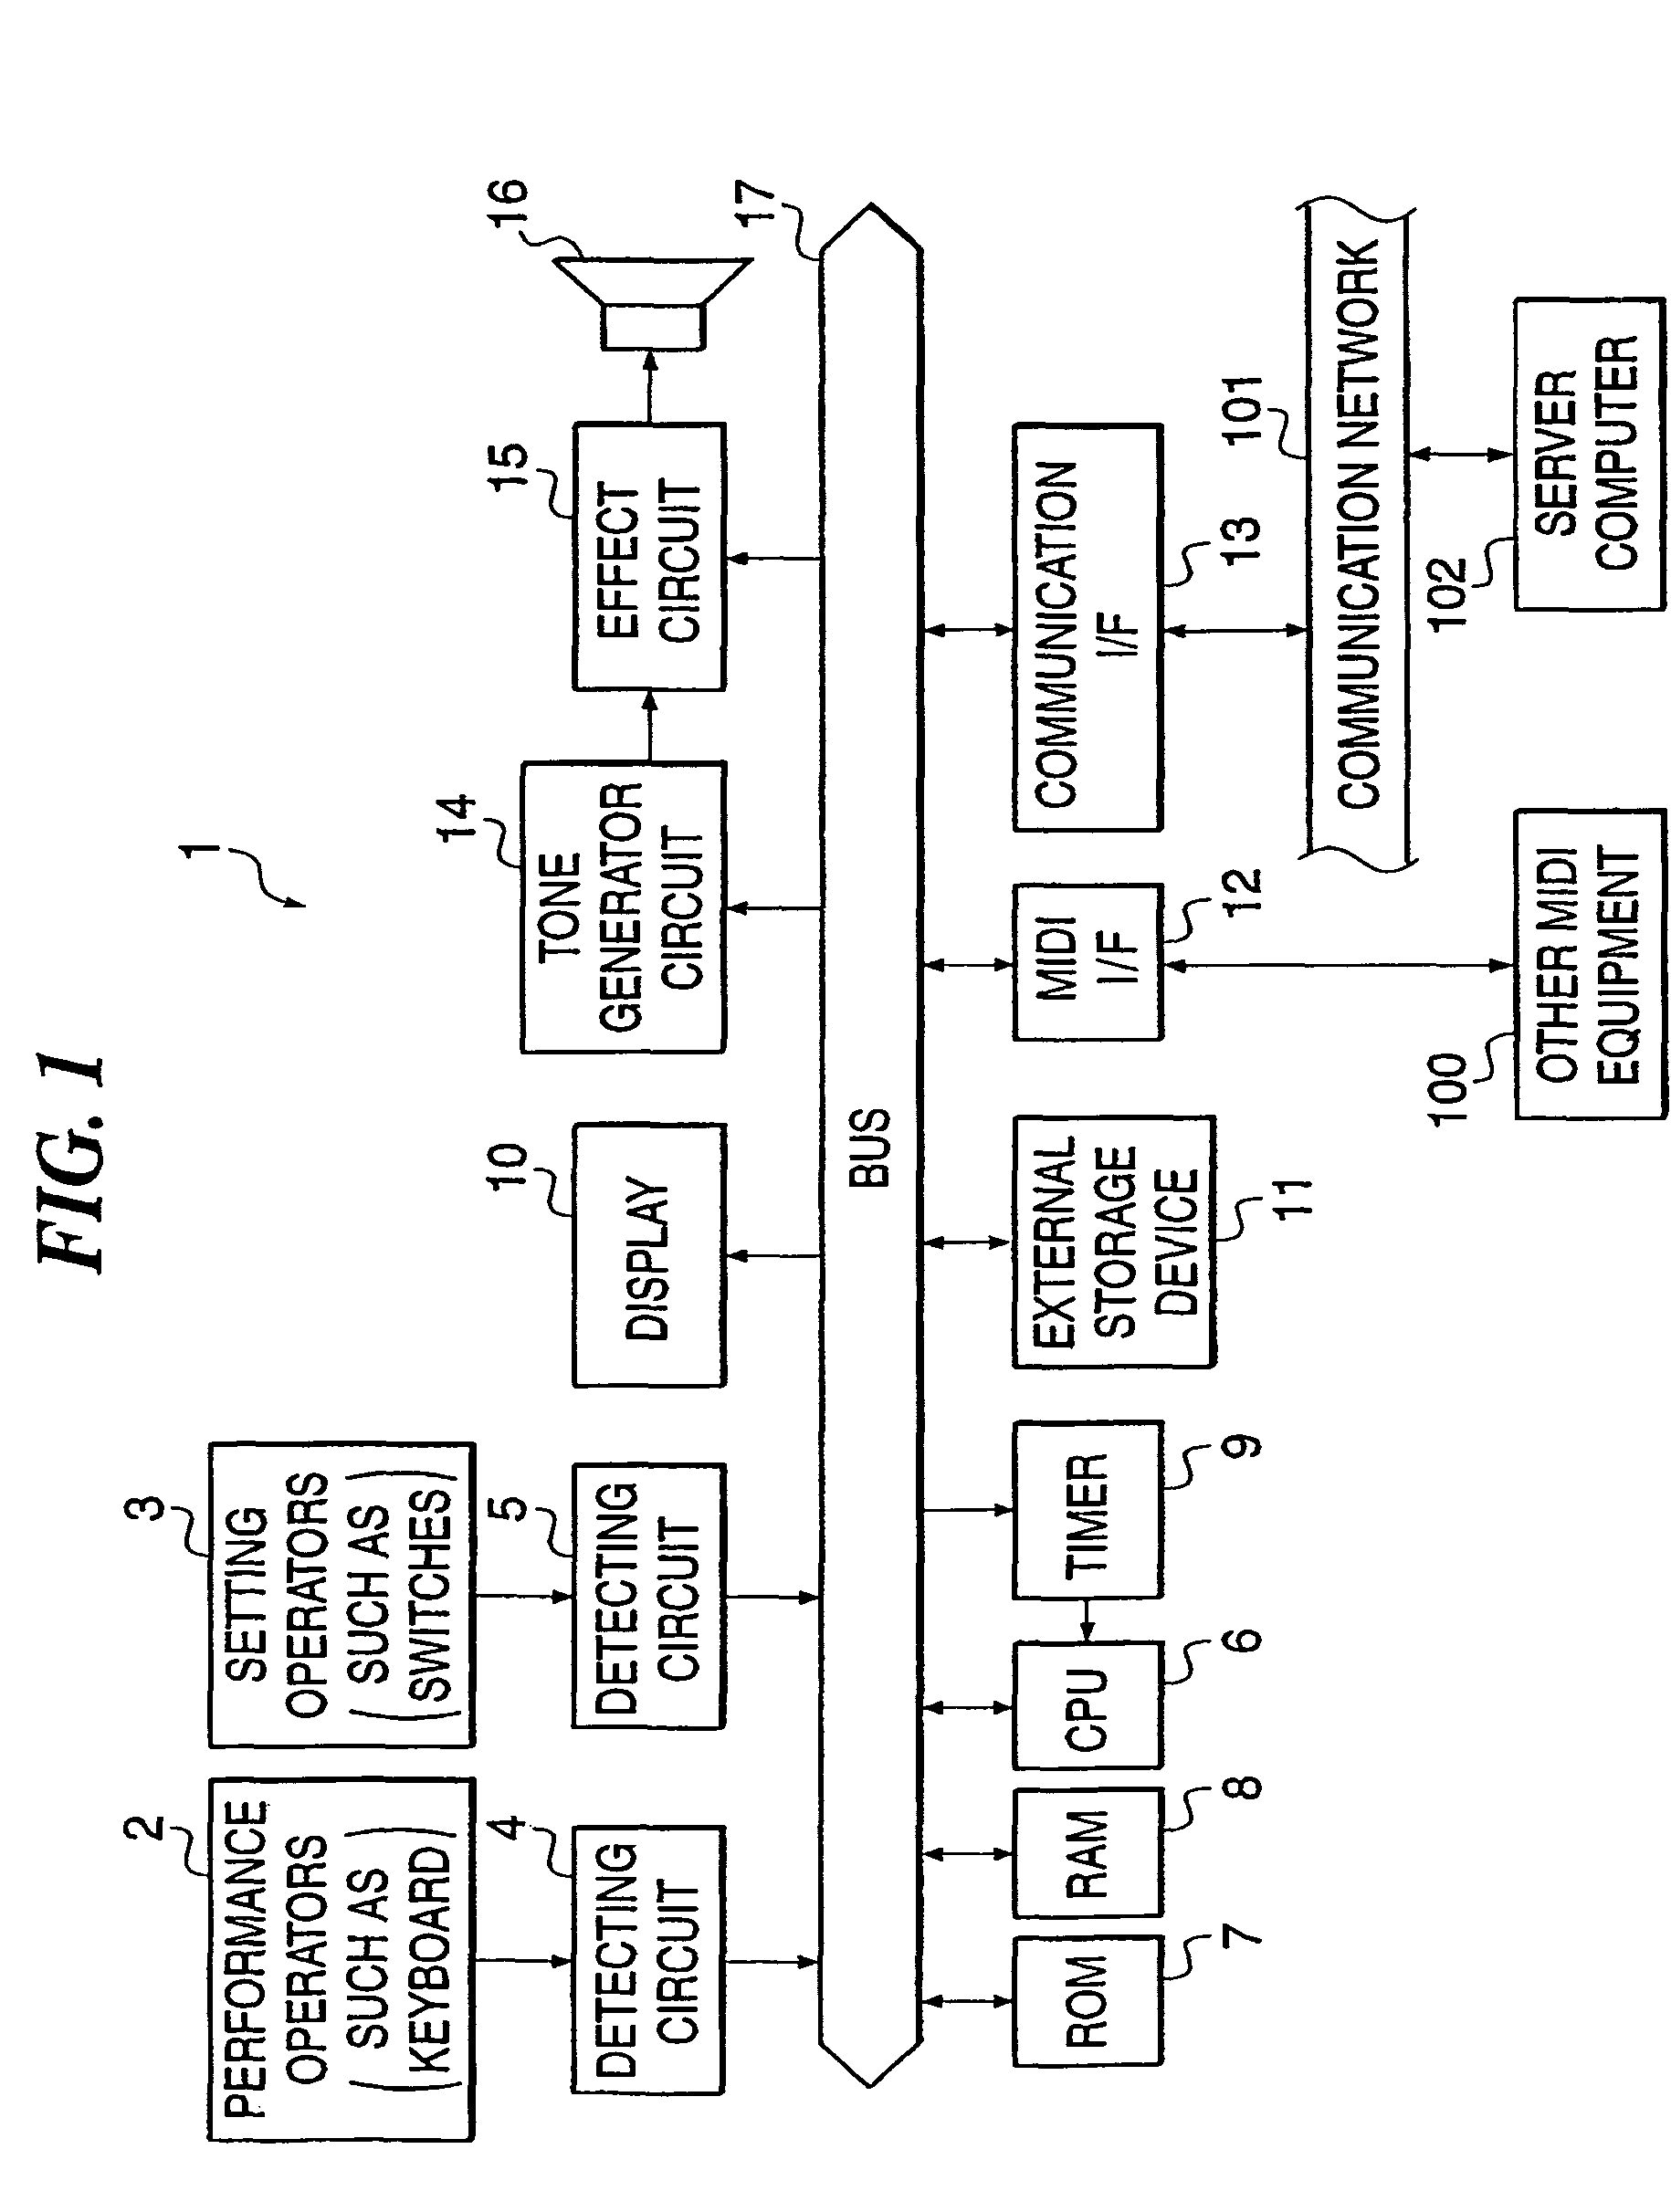 Electronic musical apparatus, control method therefor, and storage medium storing instructions for implementing the method